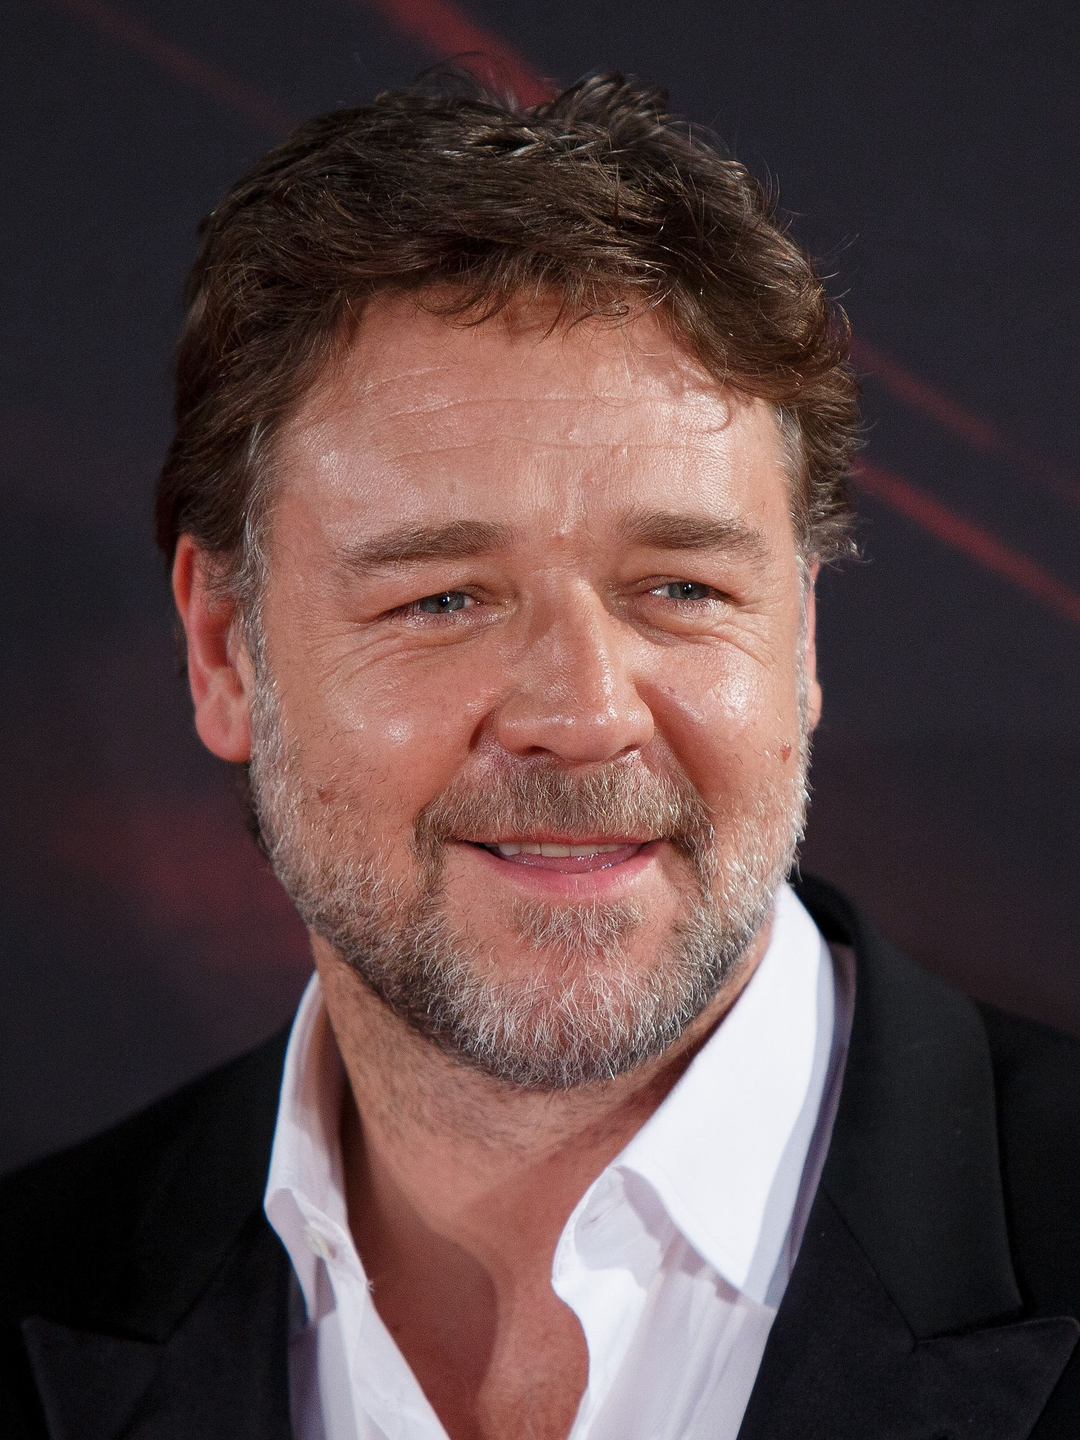 Russell Crowe where did he study